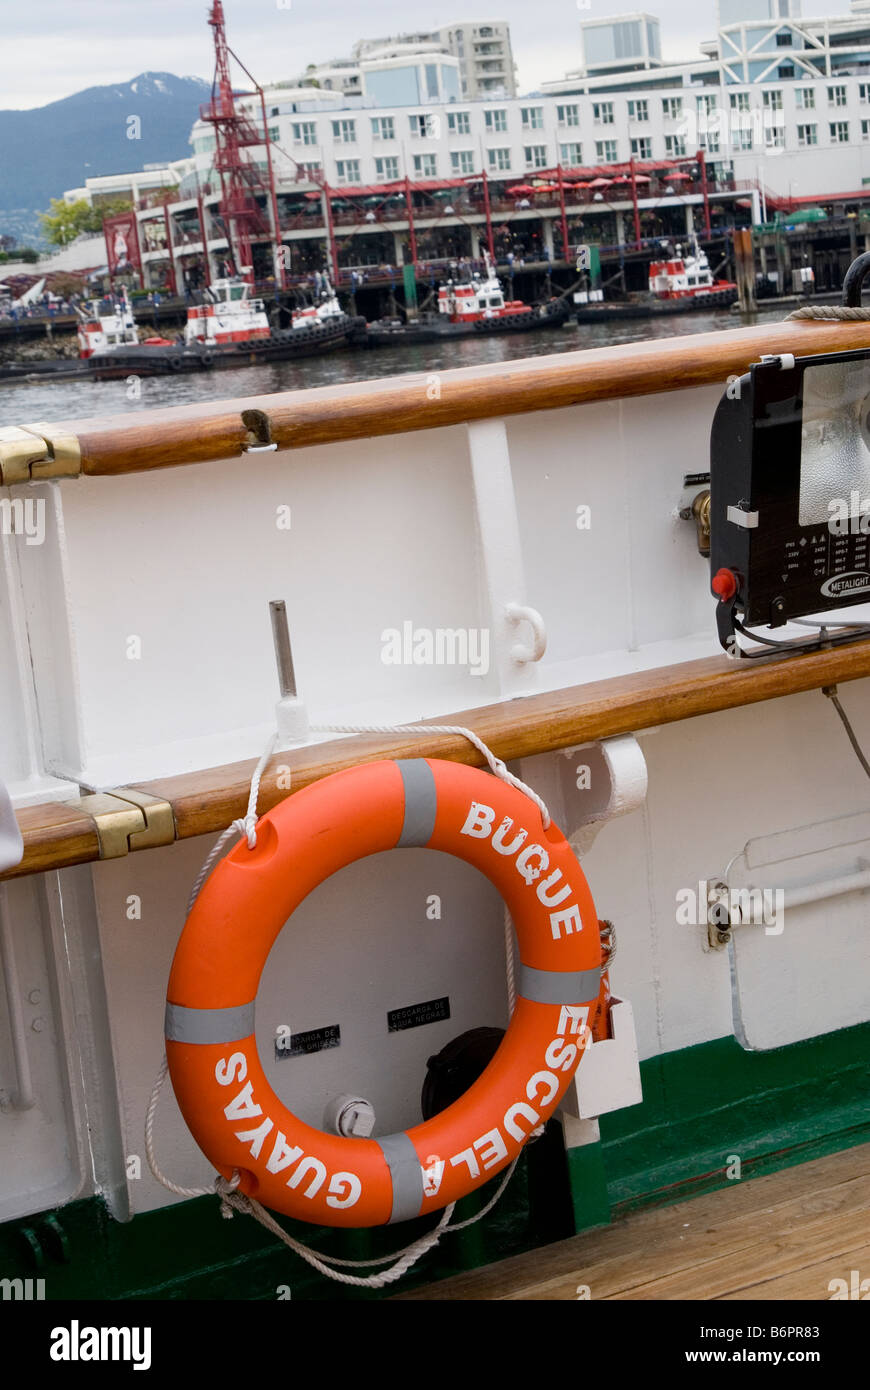 Life preserver on the side of a docked boat Stock Photo